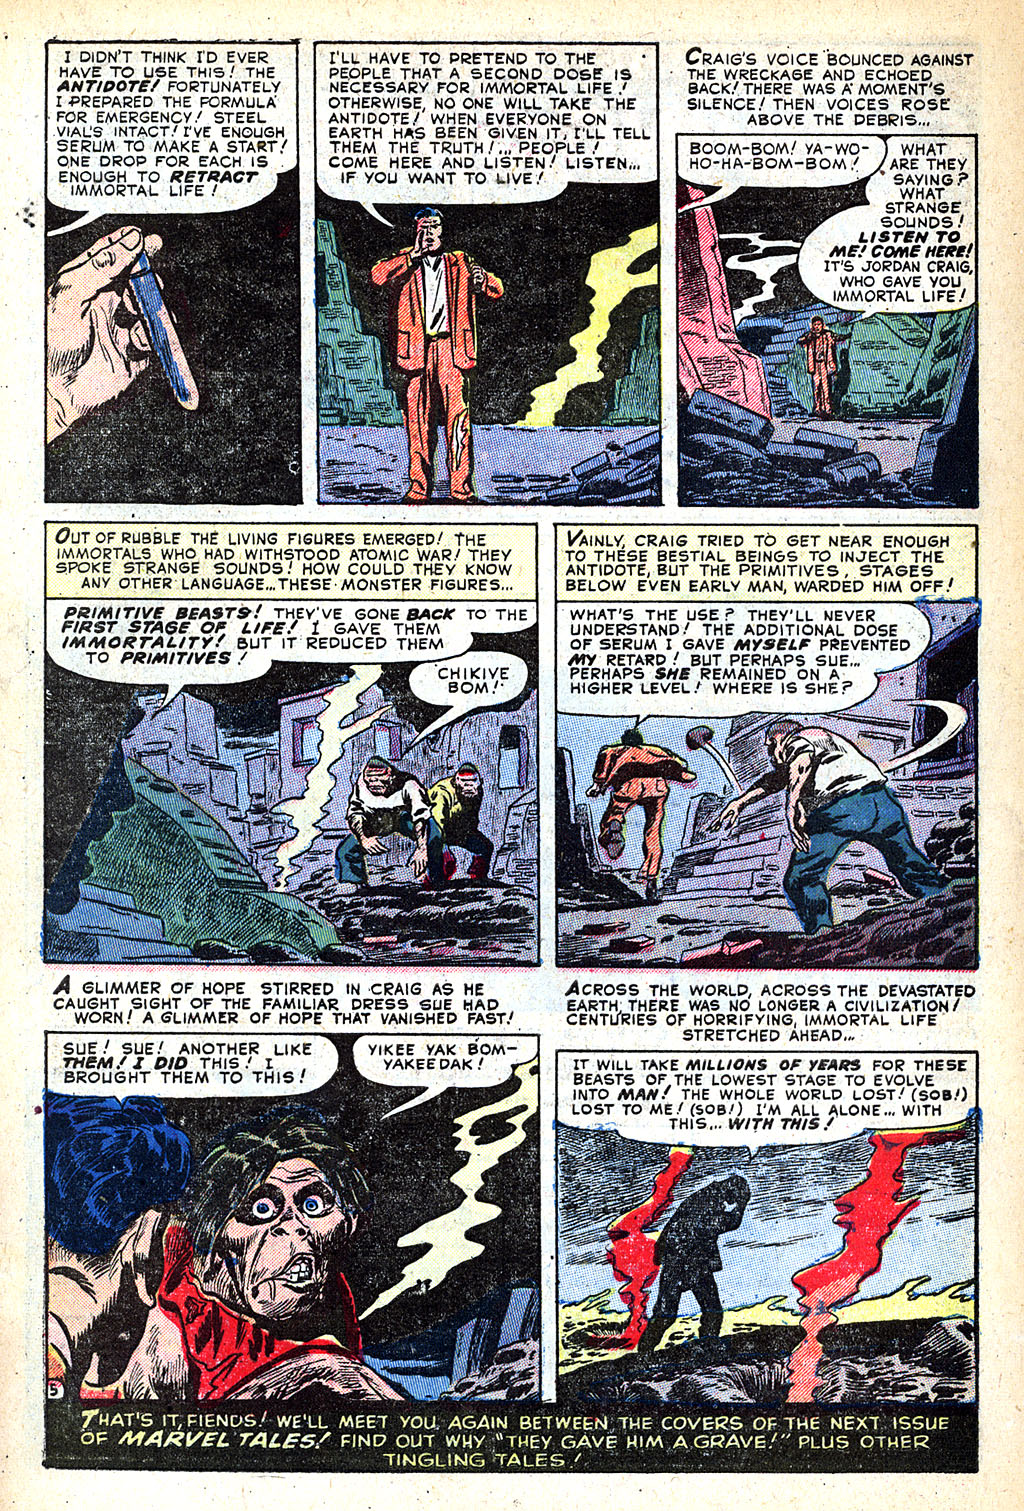 Marvel Tales (1949) 118 Page 31